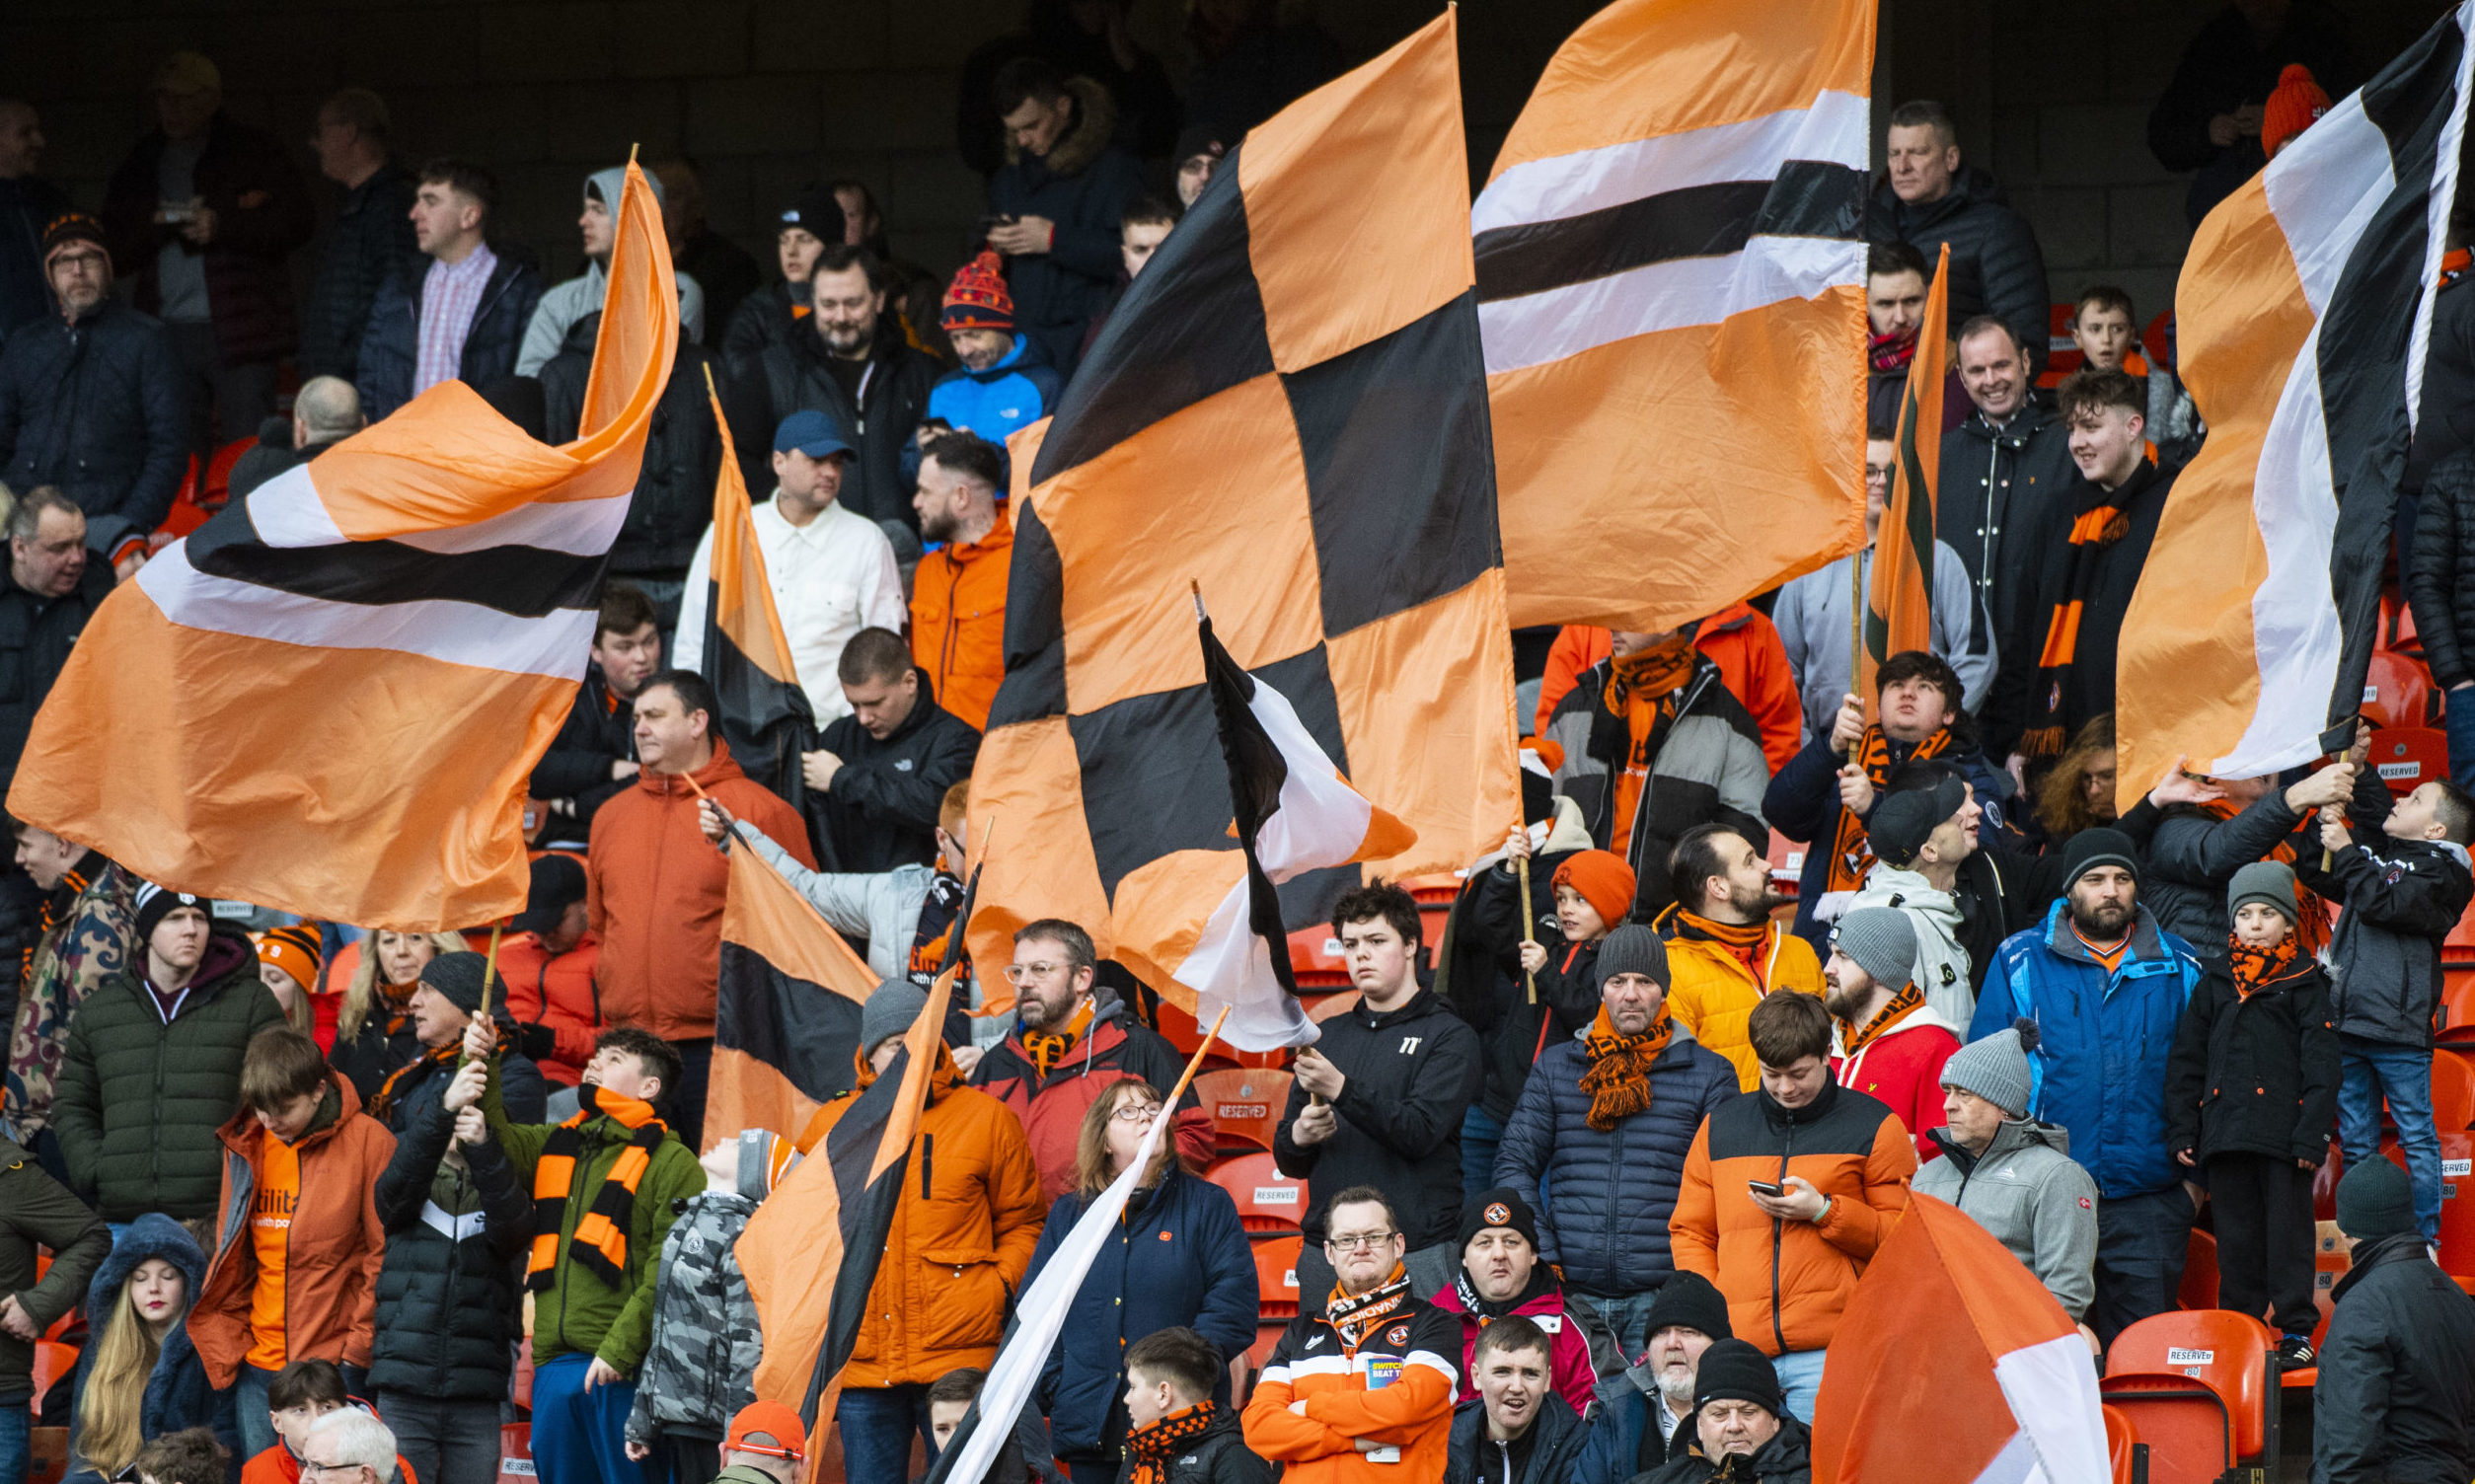 Dundee United fans have been kept waiting as SPFL weigh up decision about season